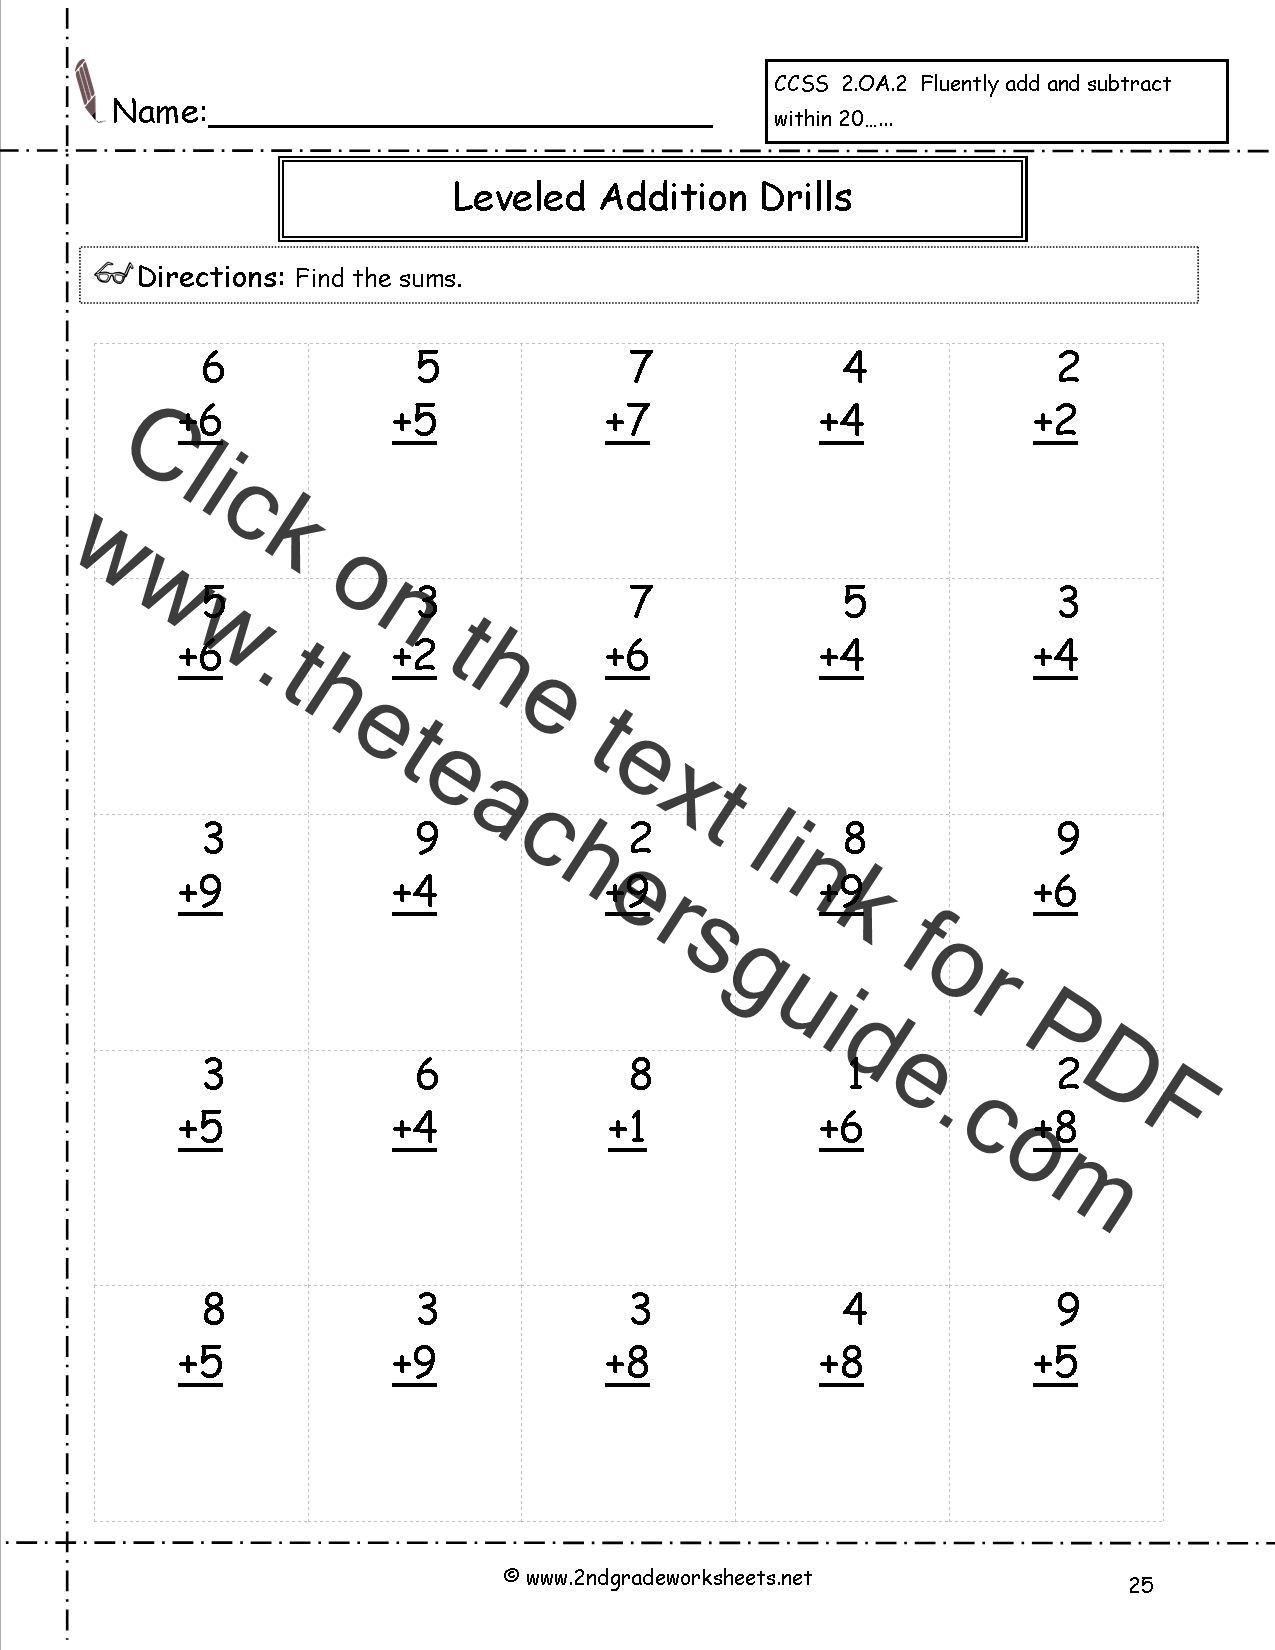 CCSS 2.OA.2 Worksheets. Addition and Subtraction Worksheets.